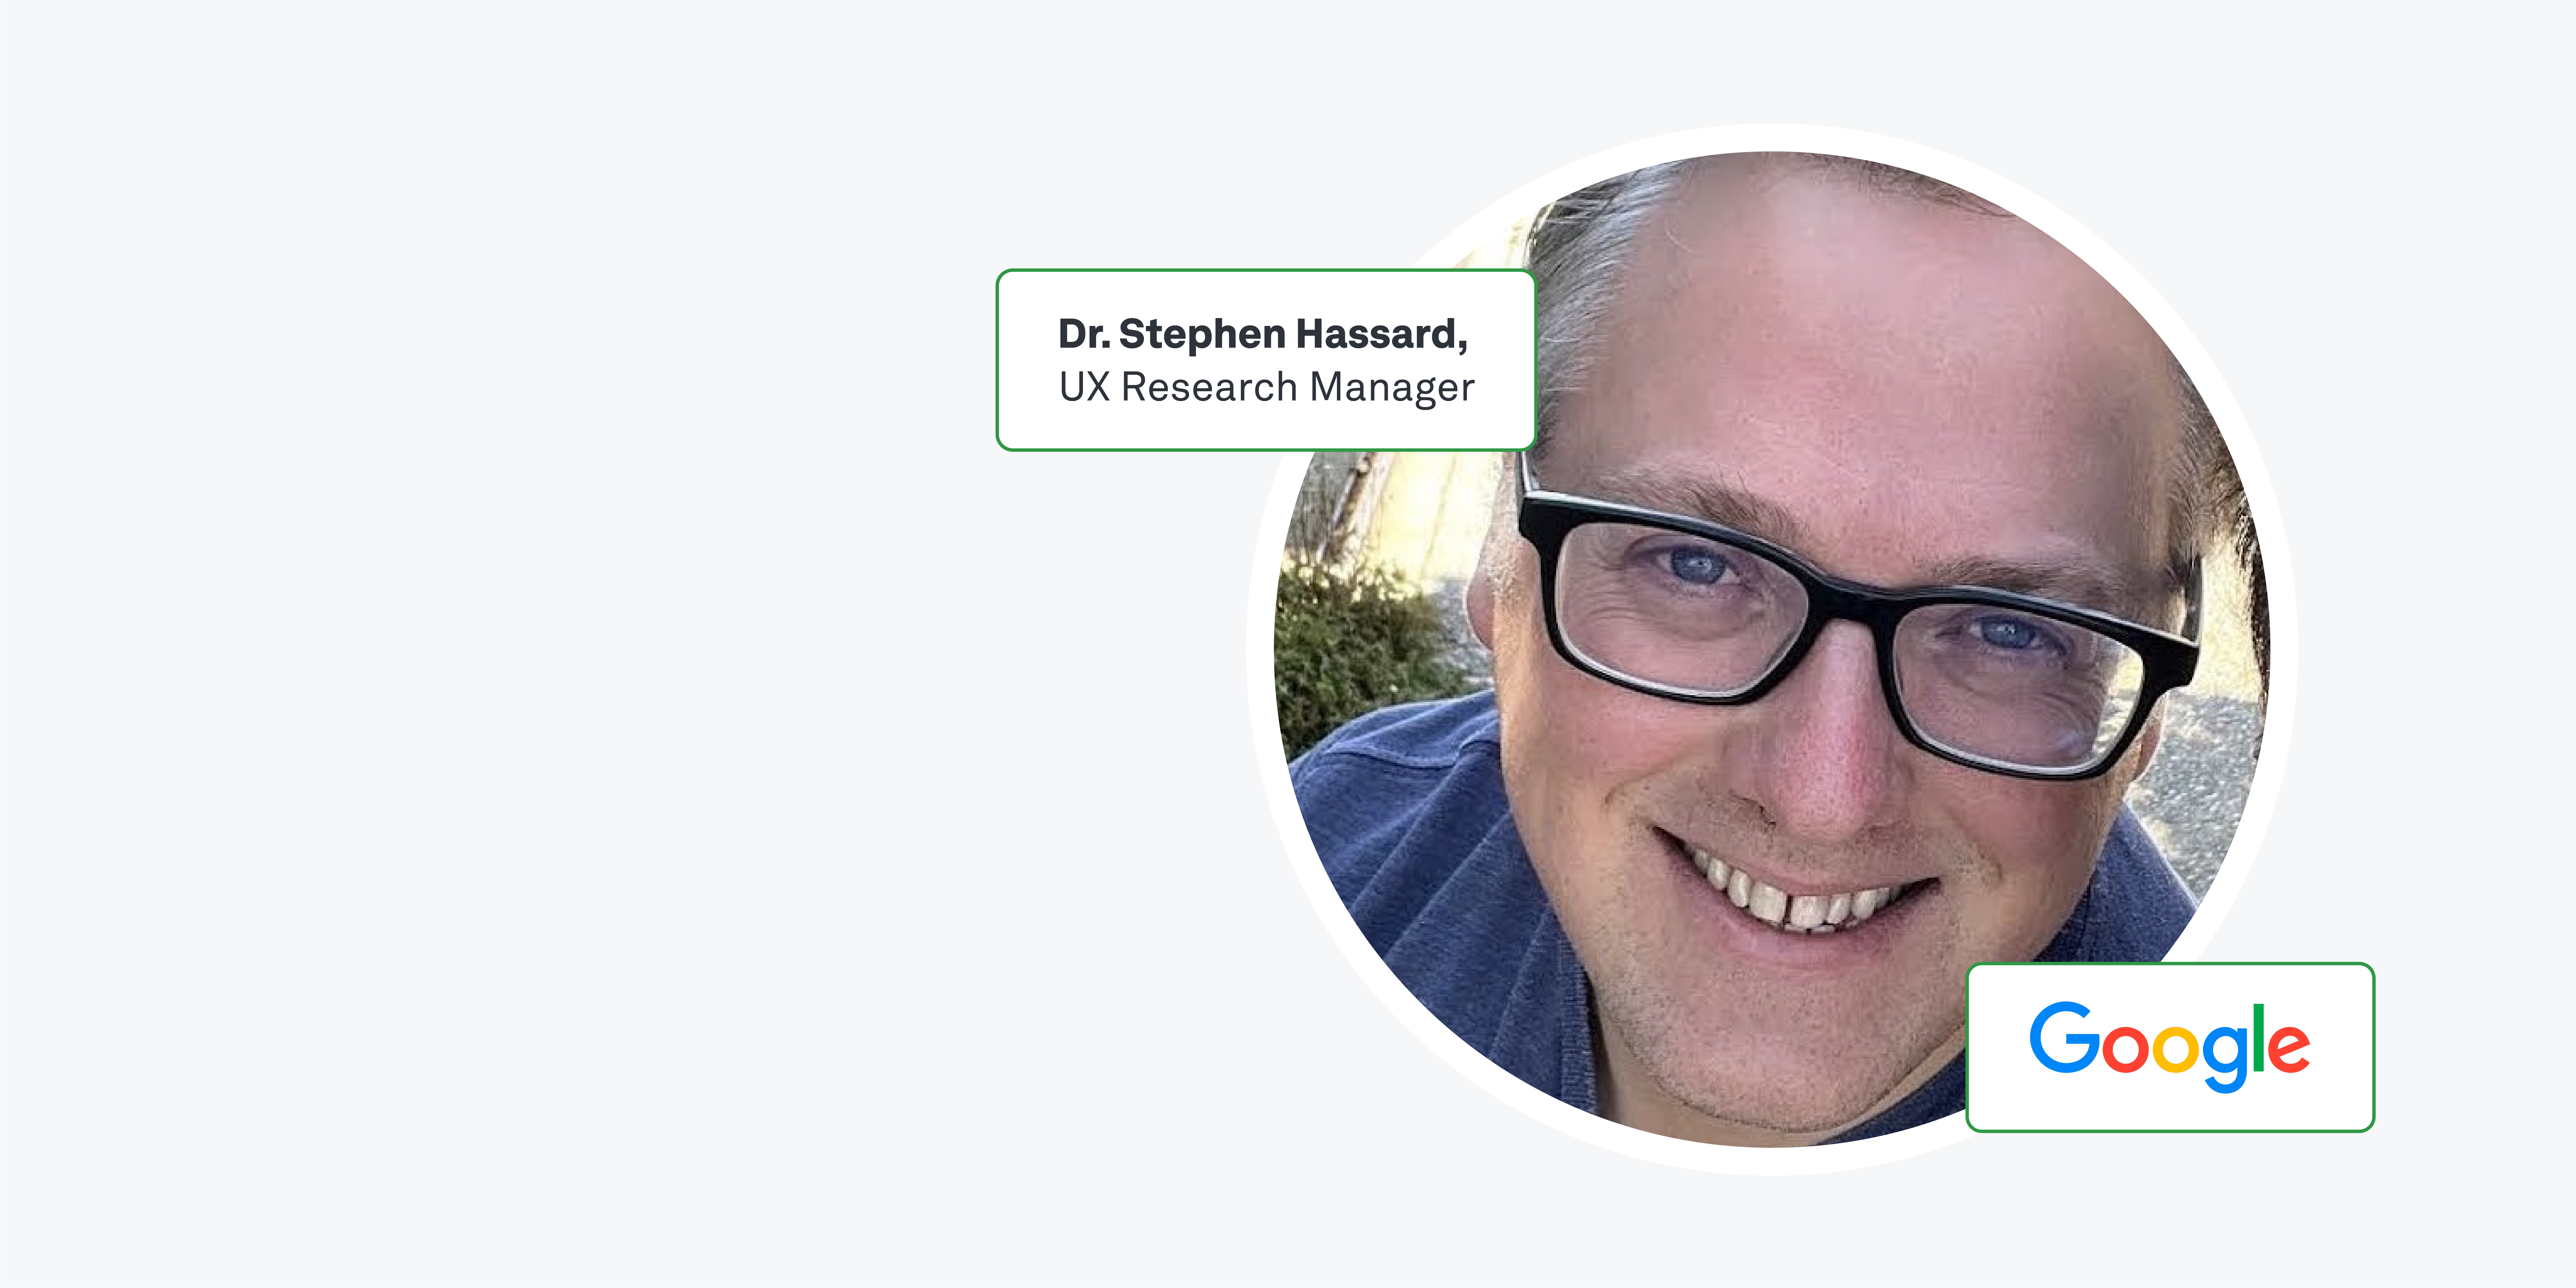 A day in the life of a UX Research Manager with Google's Dr. Stephen Hassard